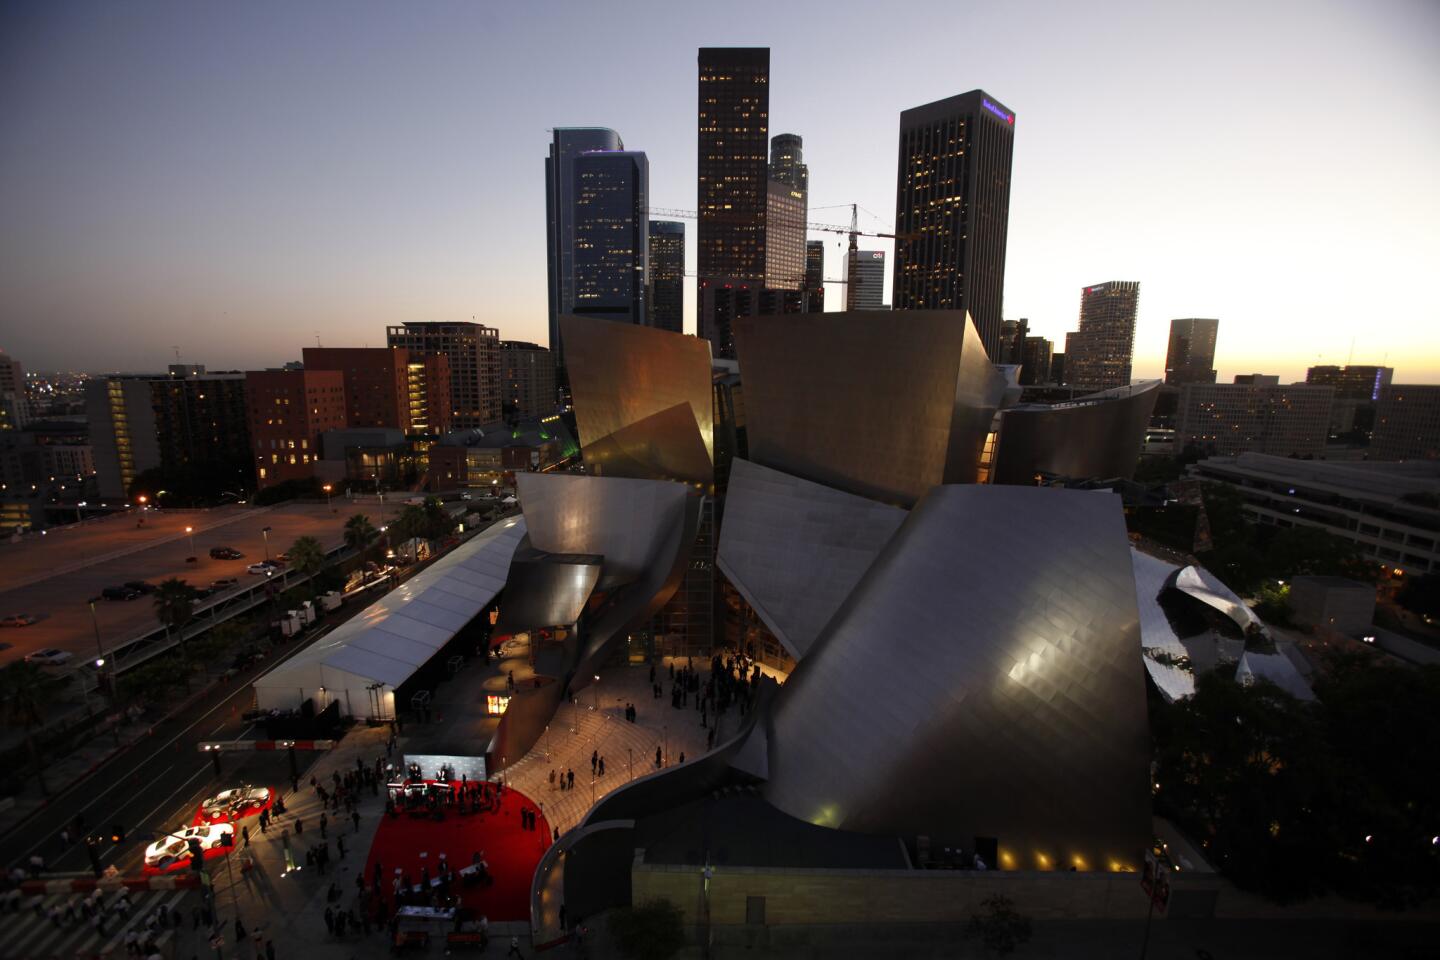 The coolest concert hall on the planet, Walt Disney Concert Hall, turned 10 and partied nonstop, its wonders never ceasing. MORE: 10 years of memorable performances | Full coverage